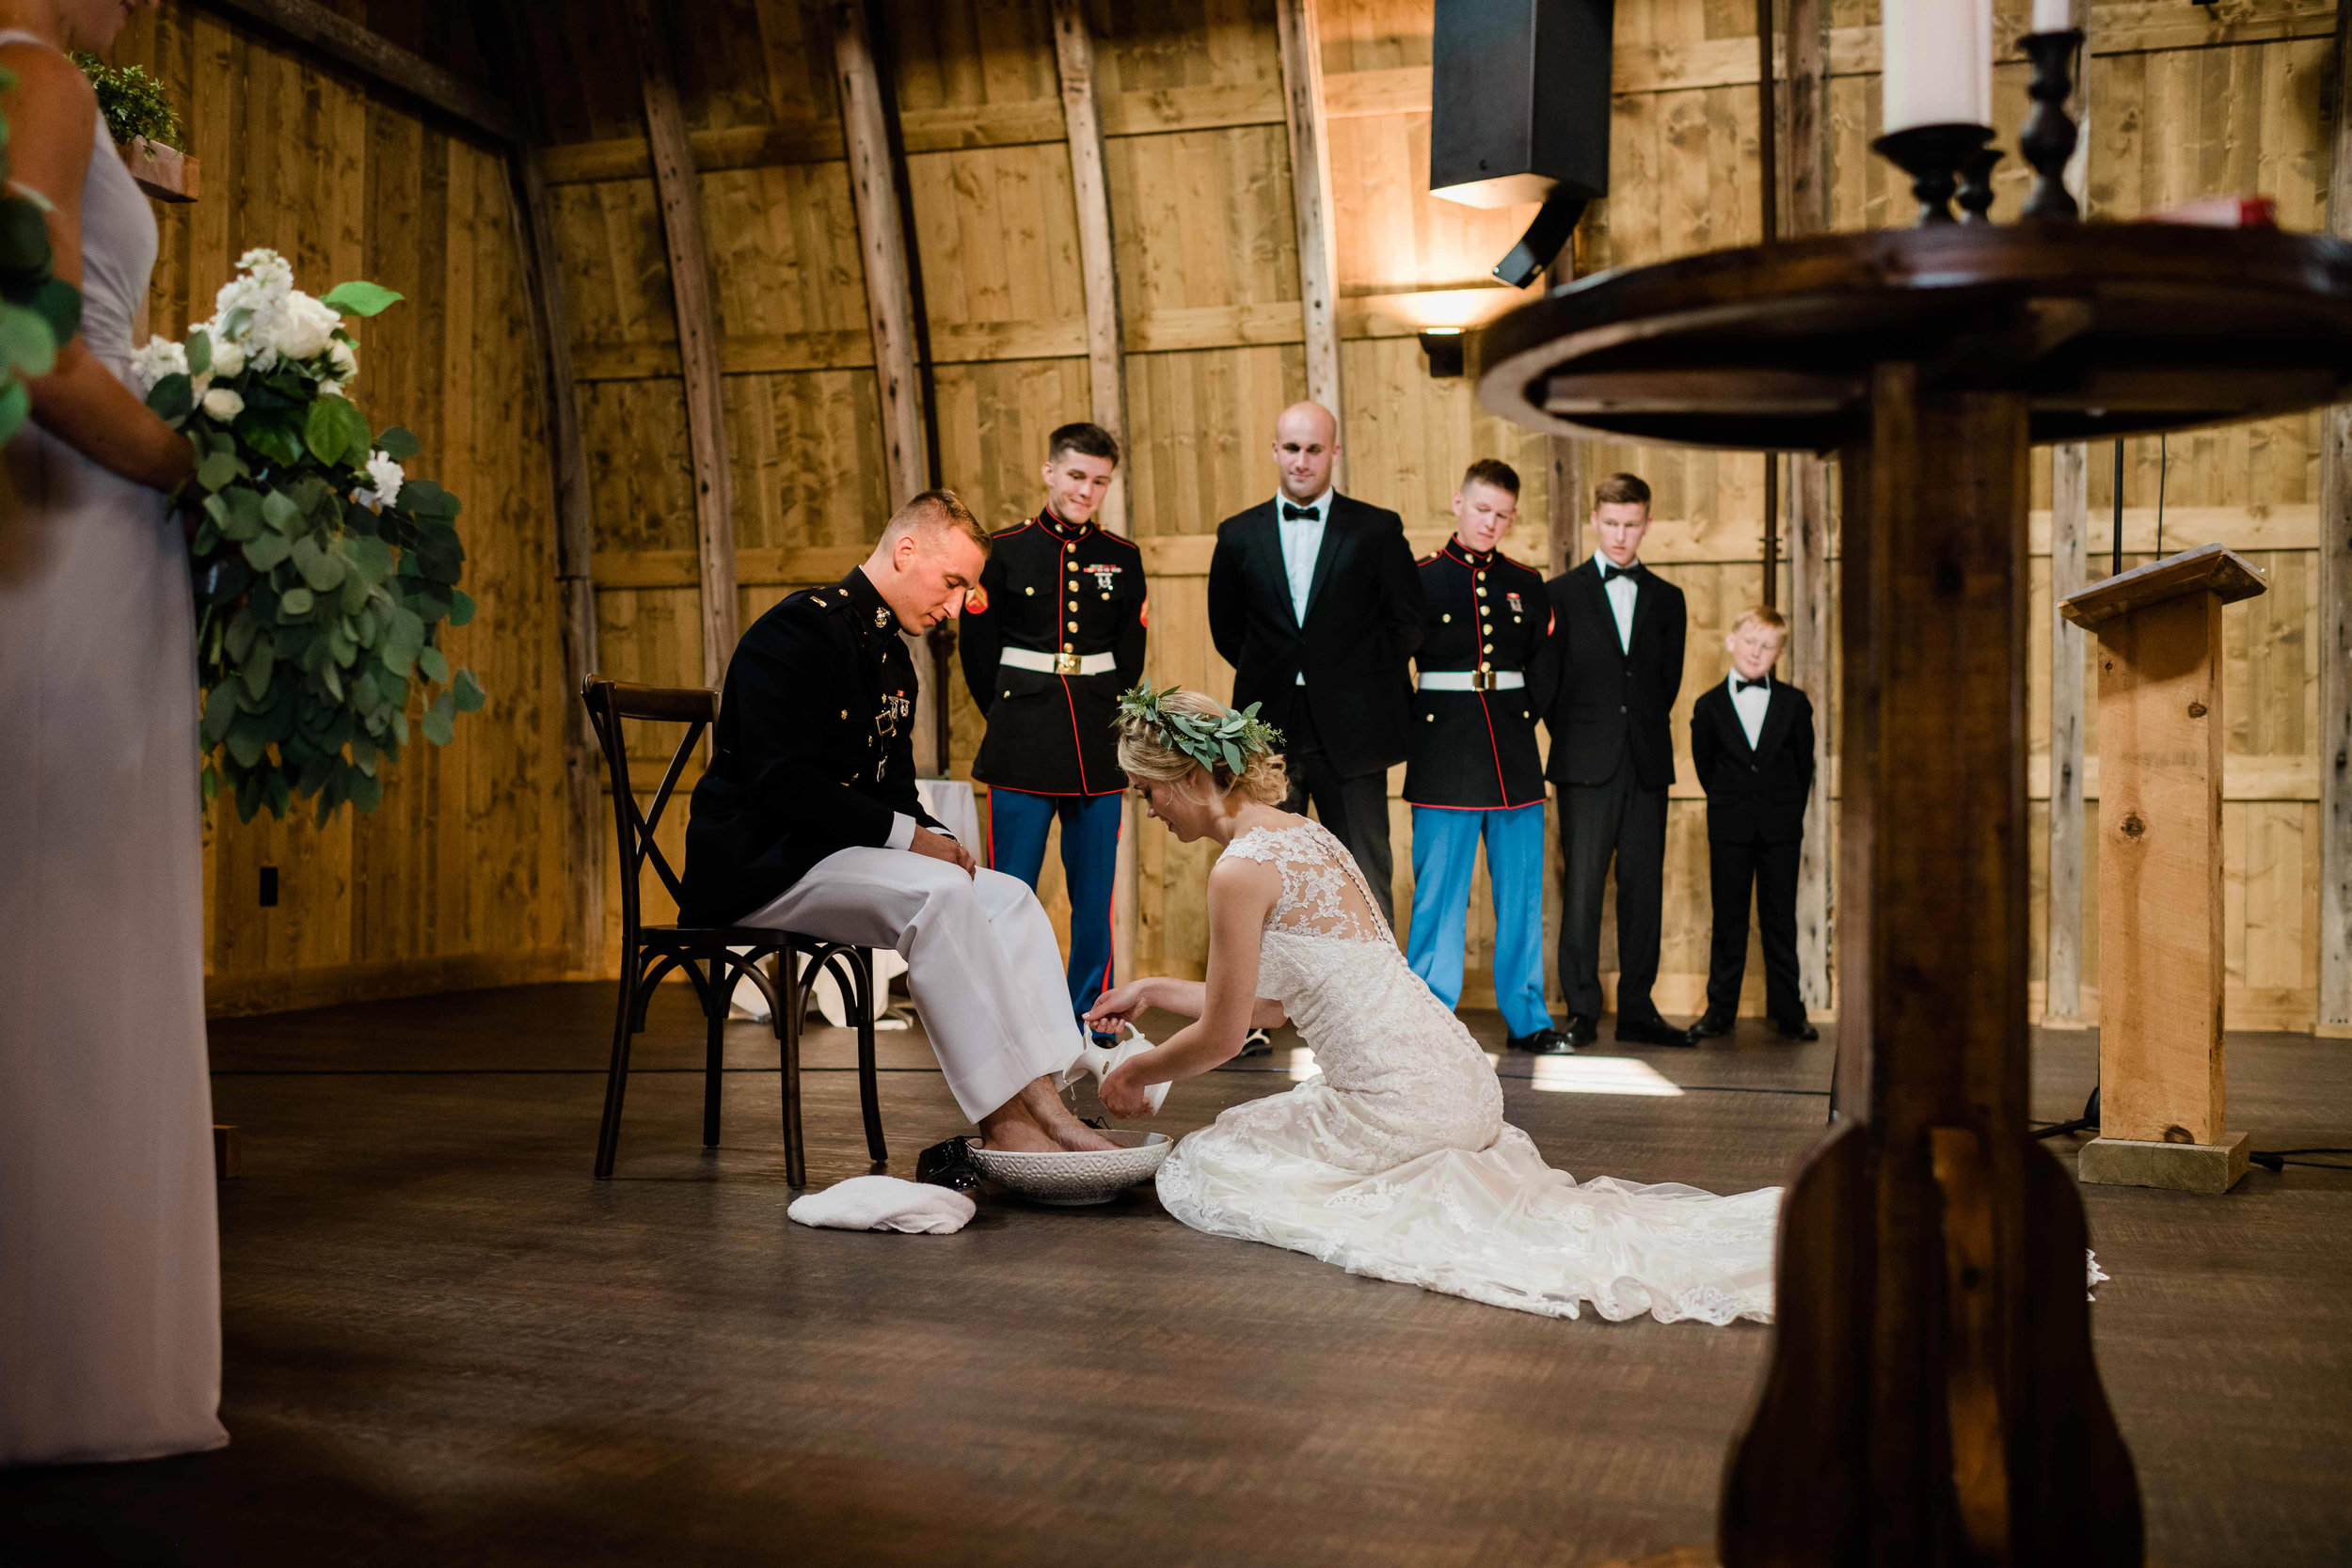 Bride and groom during foot washing ceremony